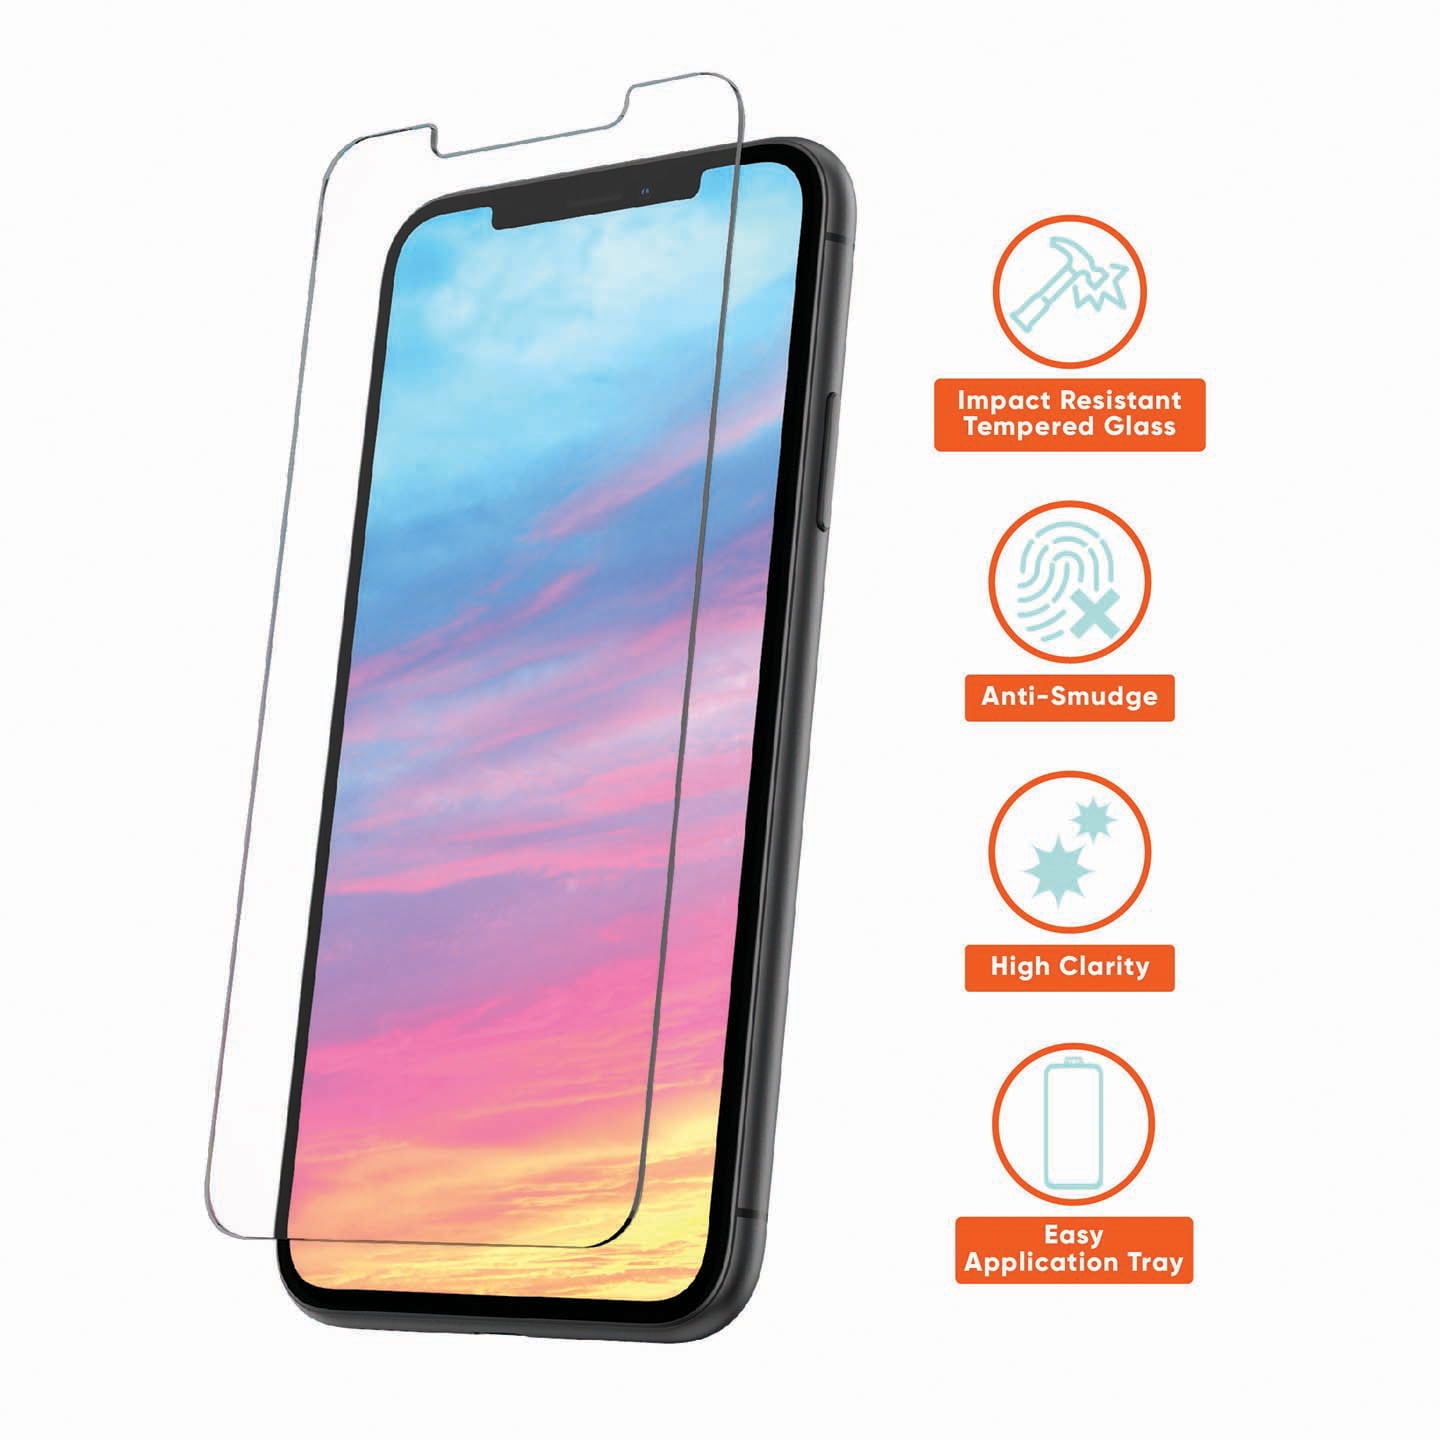 Onn Glass Screen Protector With Impactguard Technology For Iphone 11 Iphone Xr Walmart Com